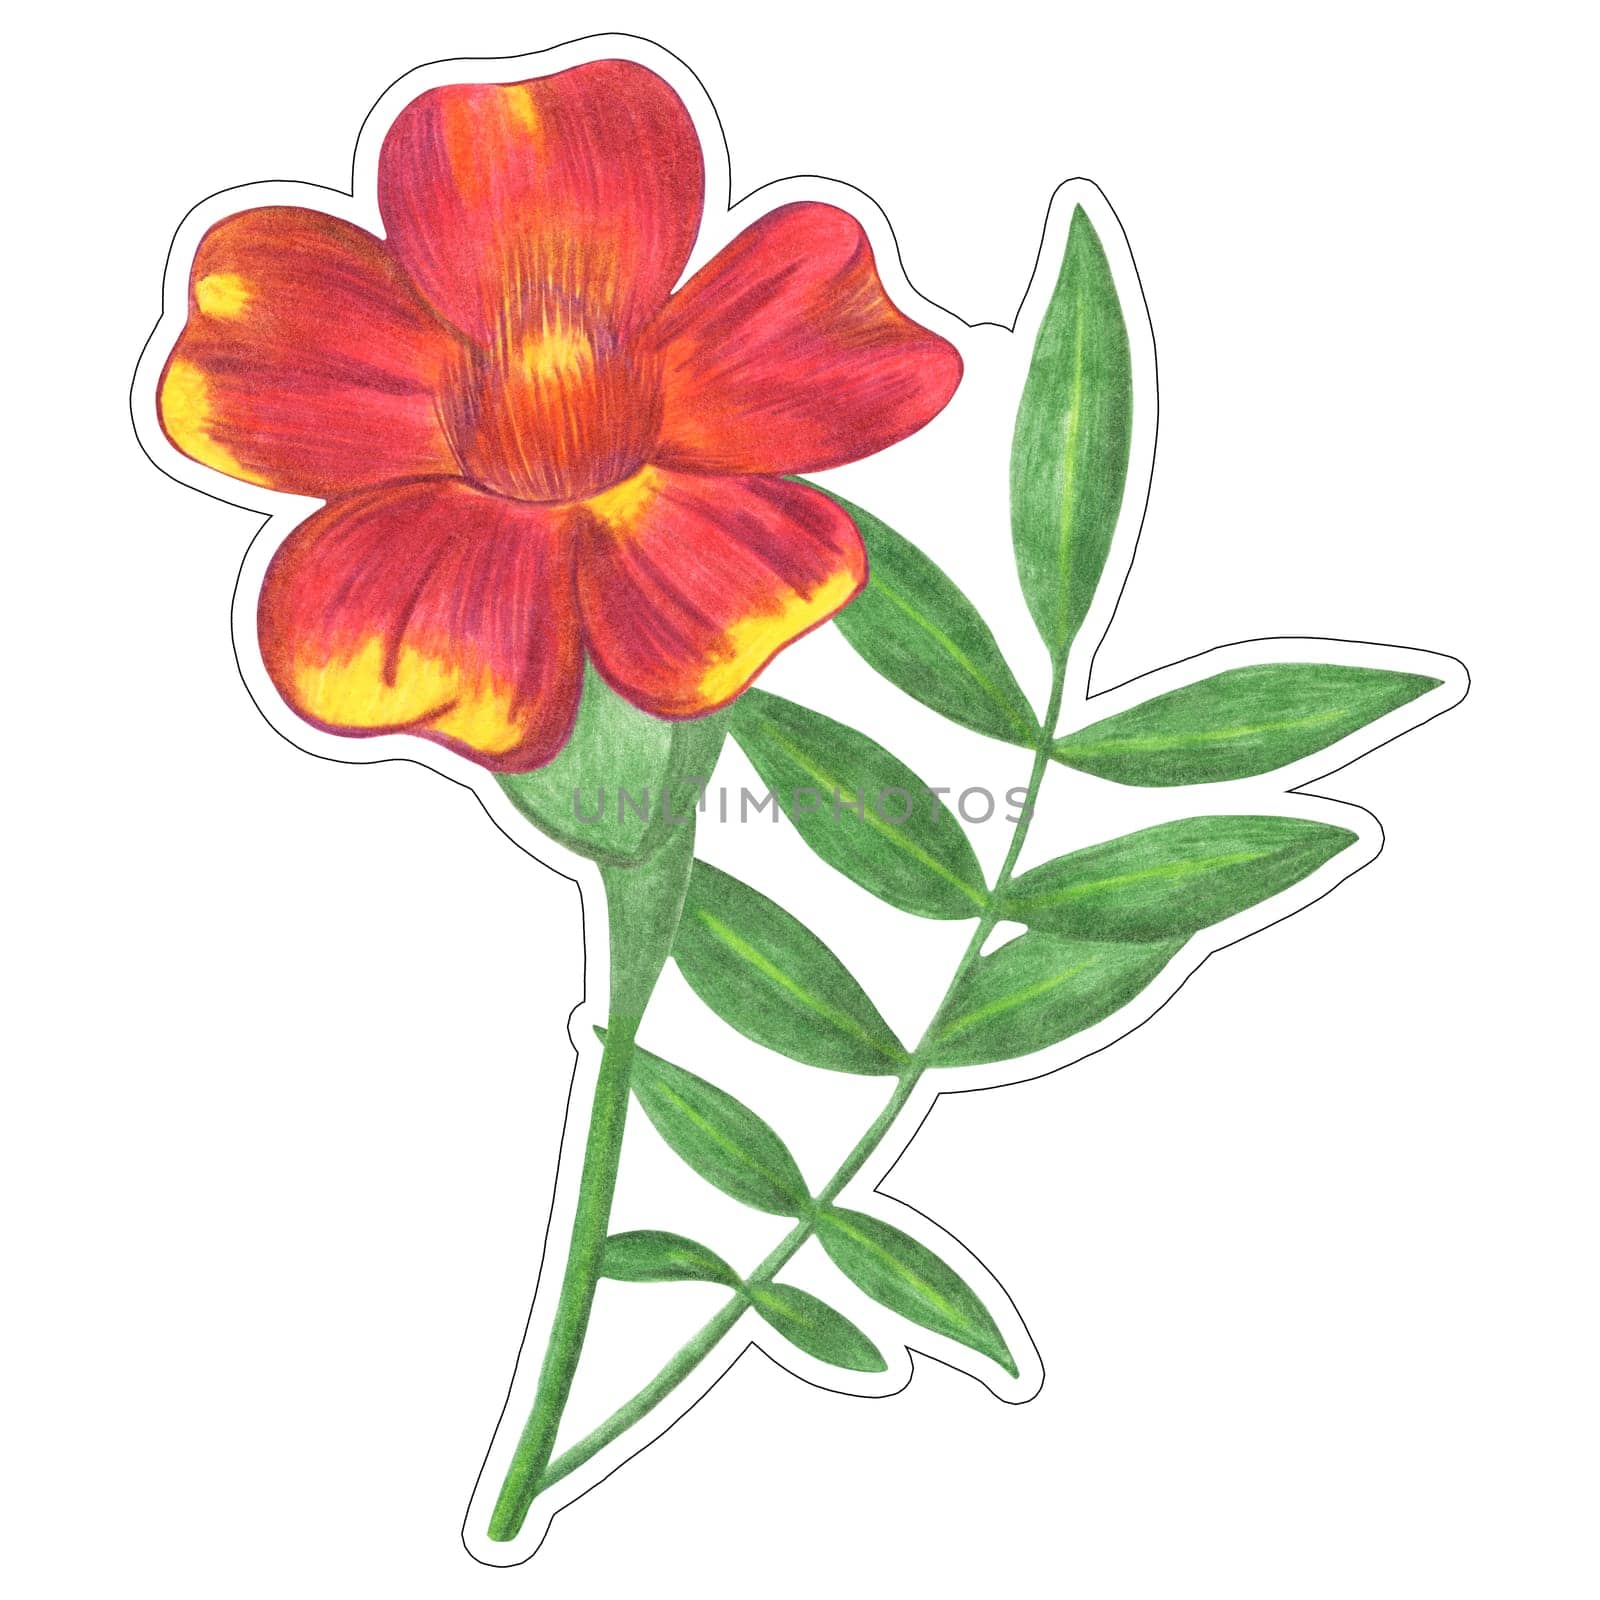 Hand Drawn Red Marigold with Green Leaves Sticker Isolated on White Background. by Rina_Dozornaya